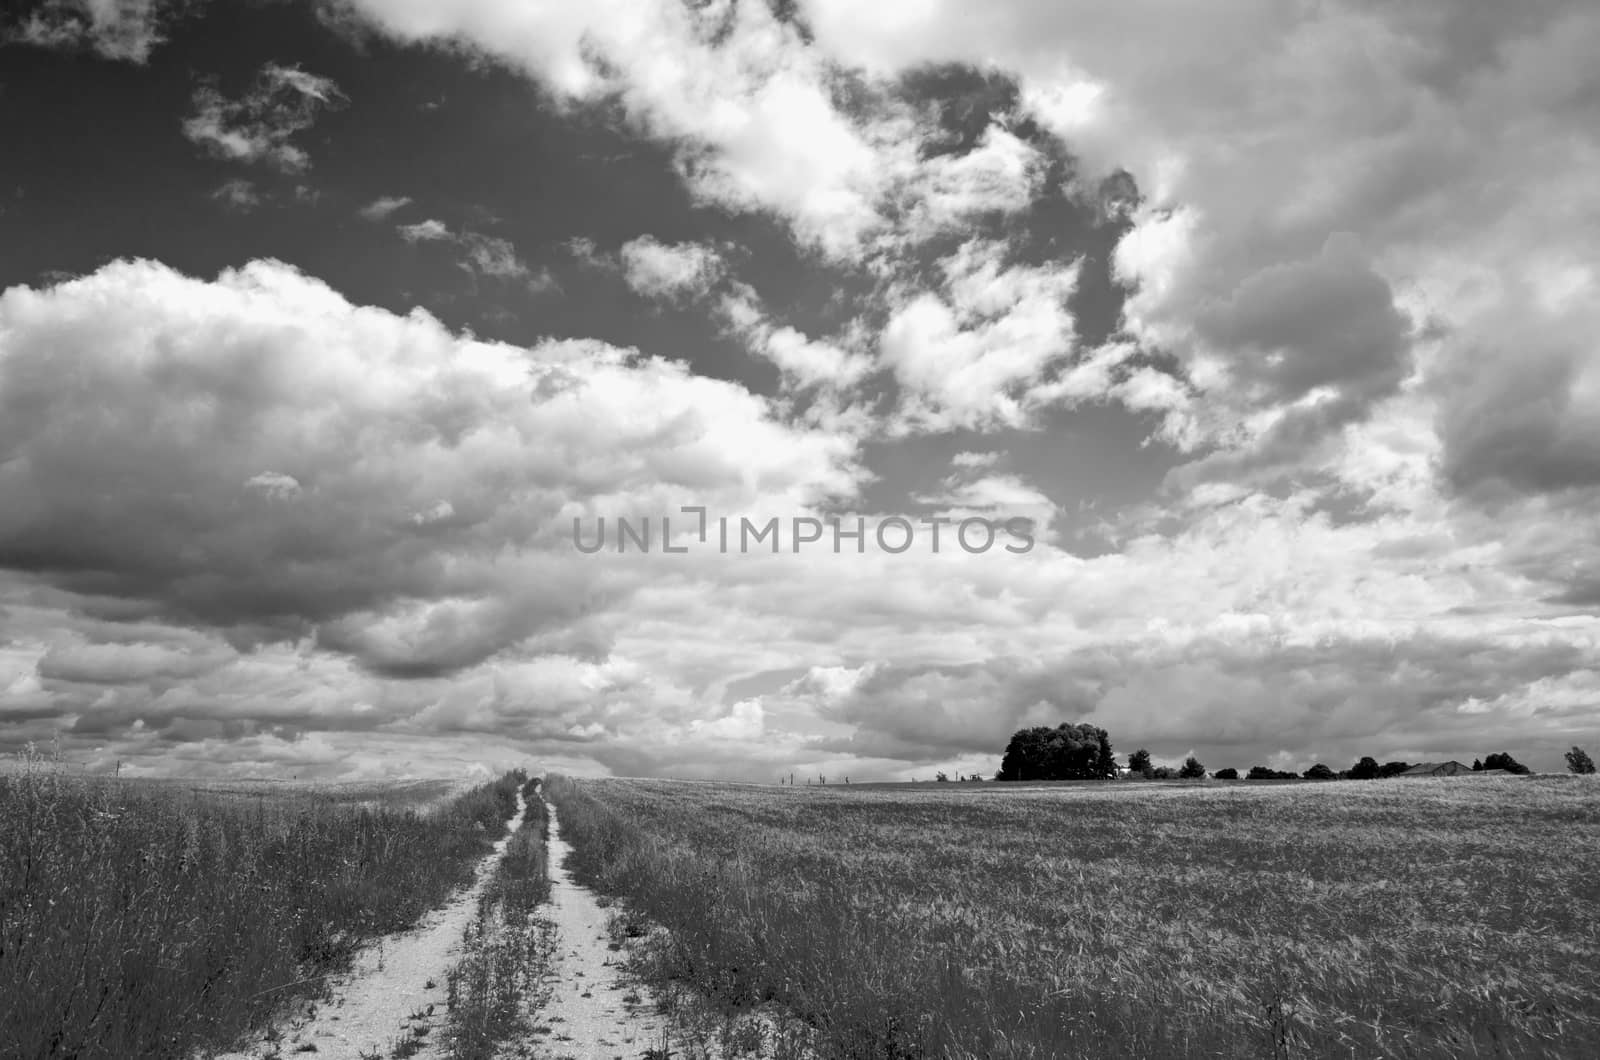 Country road through meadow, black and white rural landscape